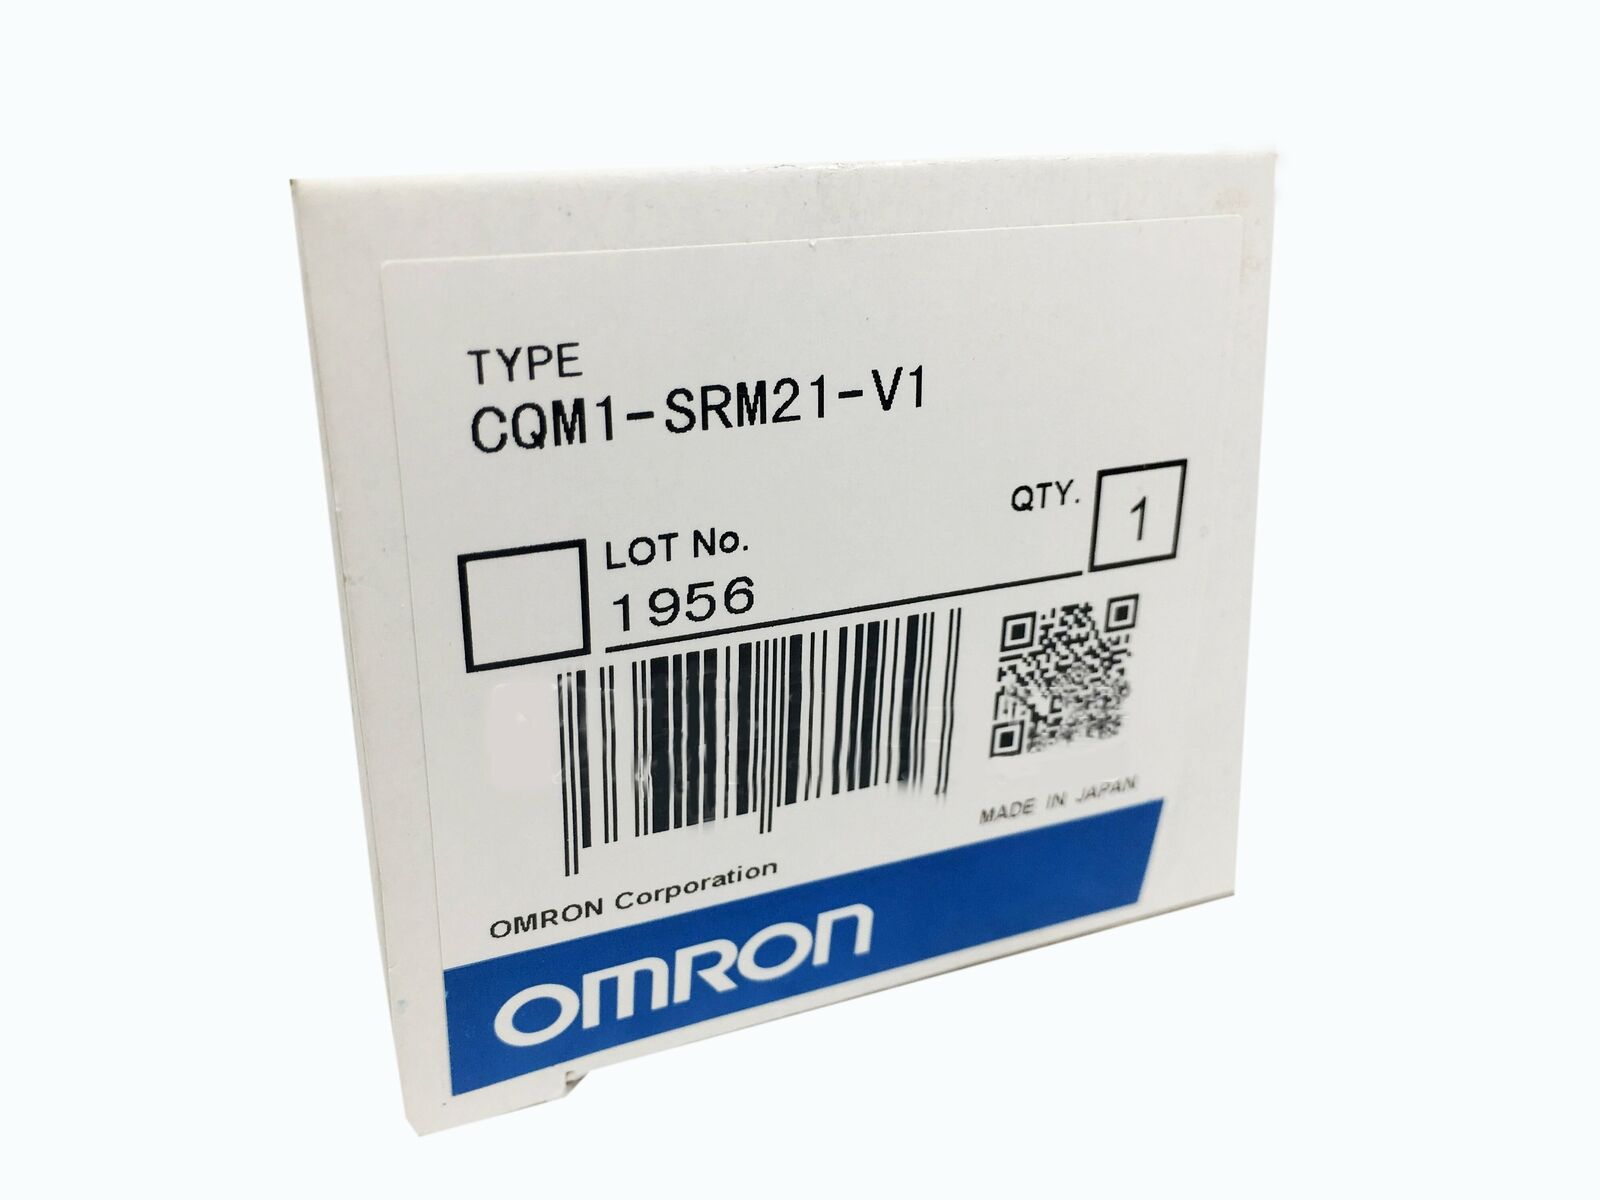 1pc new Omron CQM1-SRM21-V1 module one year warranty KOEED 201-500, 80%, import_2020_10_10_031751, Omron, Other